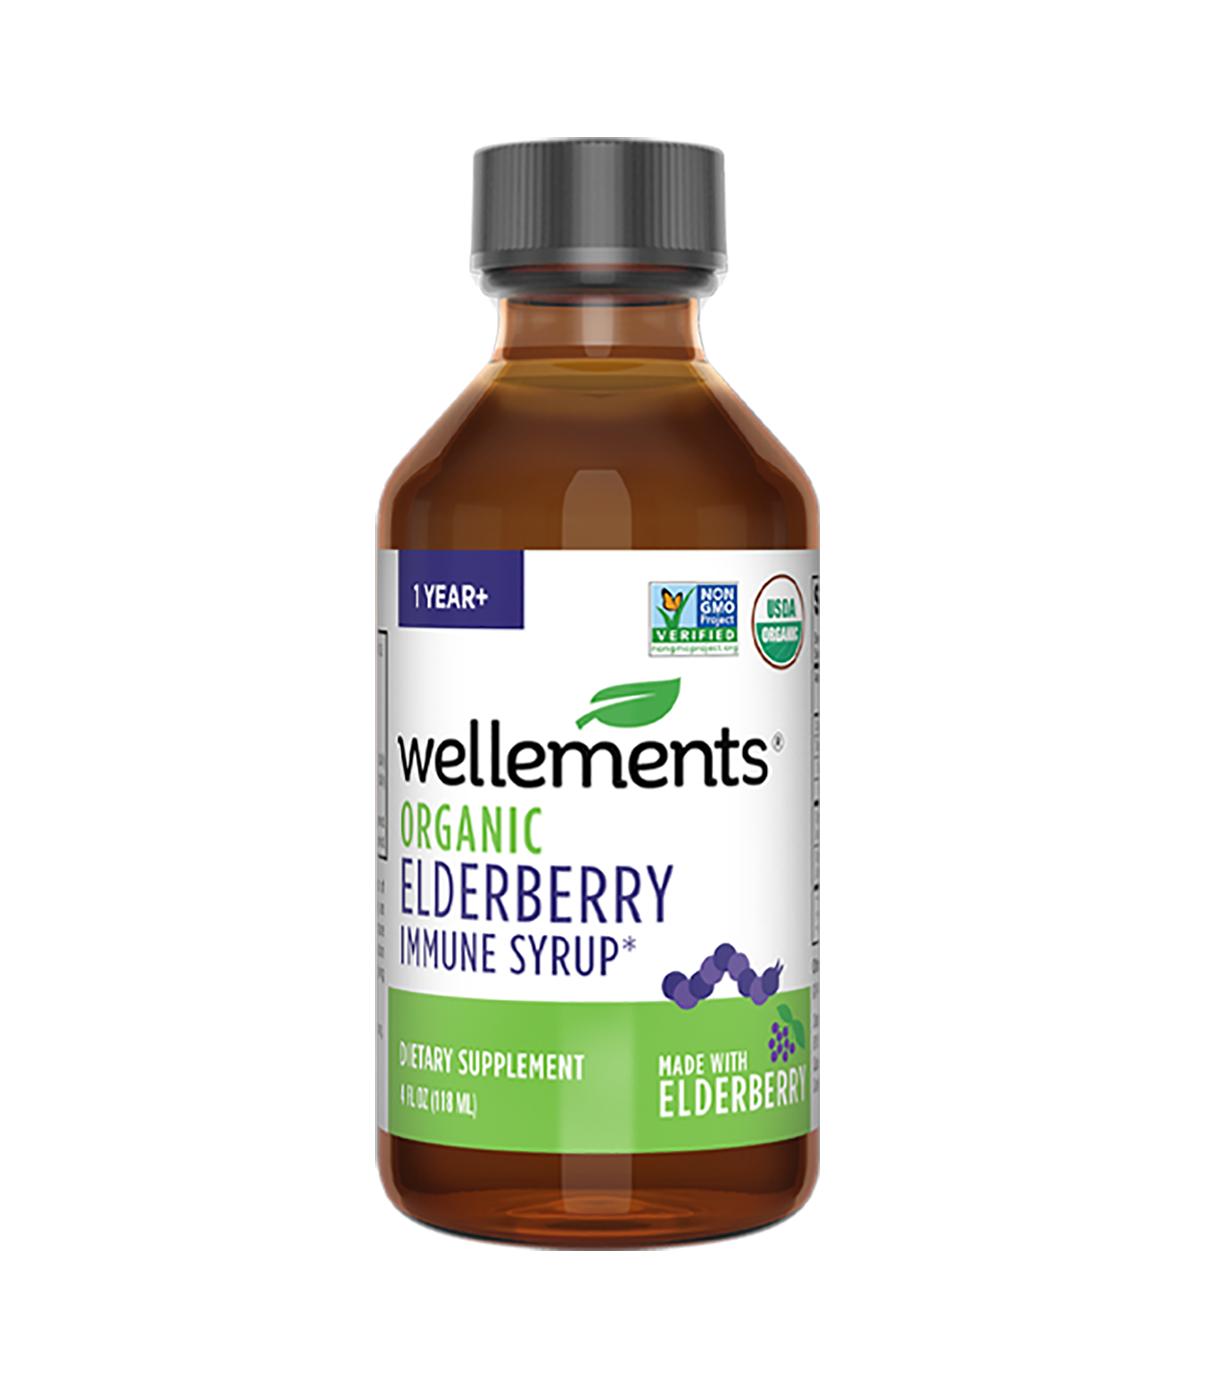 Wellements Organic Elderberry Immune Syrup; image 2 of 2